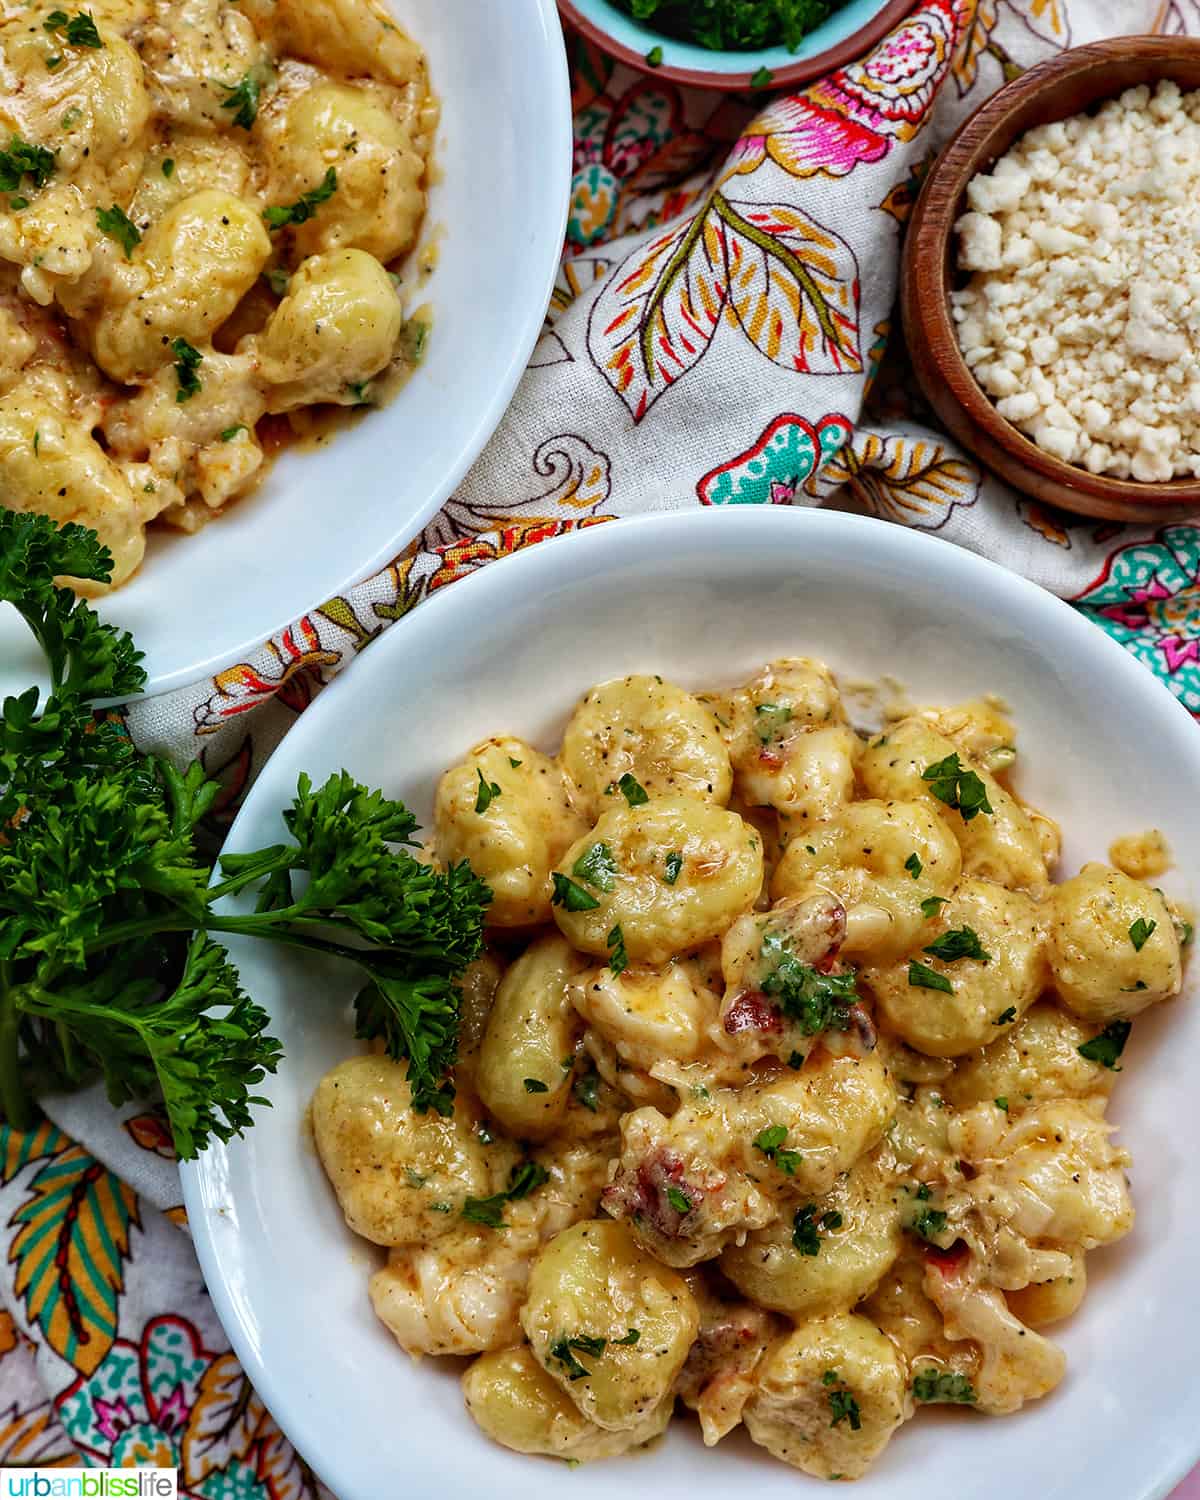 two bowls of lobster gnocchi with herbs and sides of garnishes.